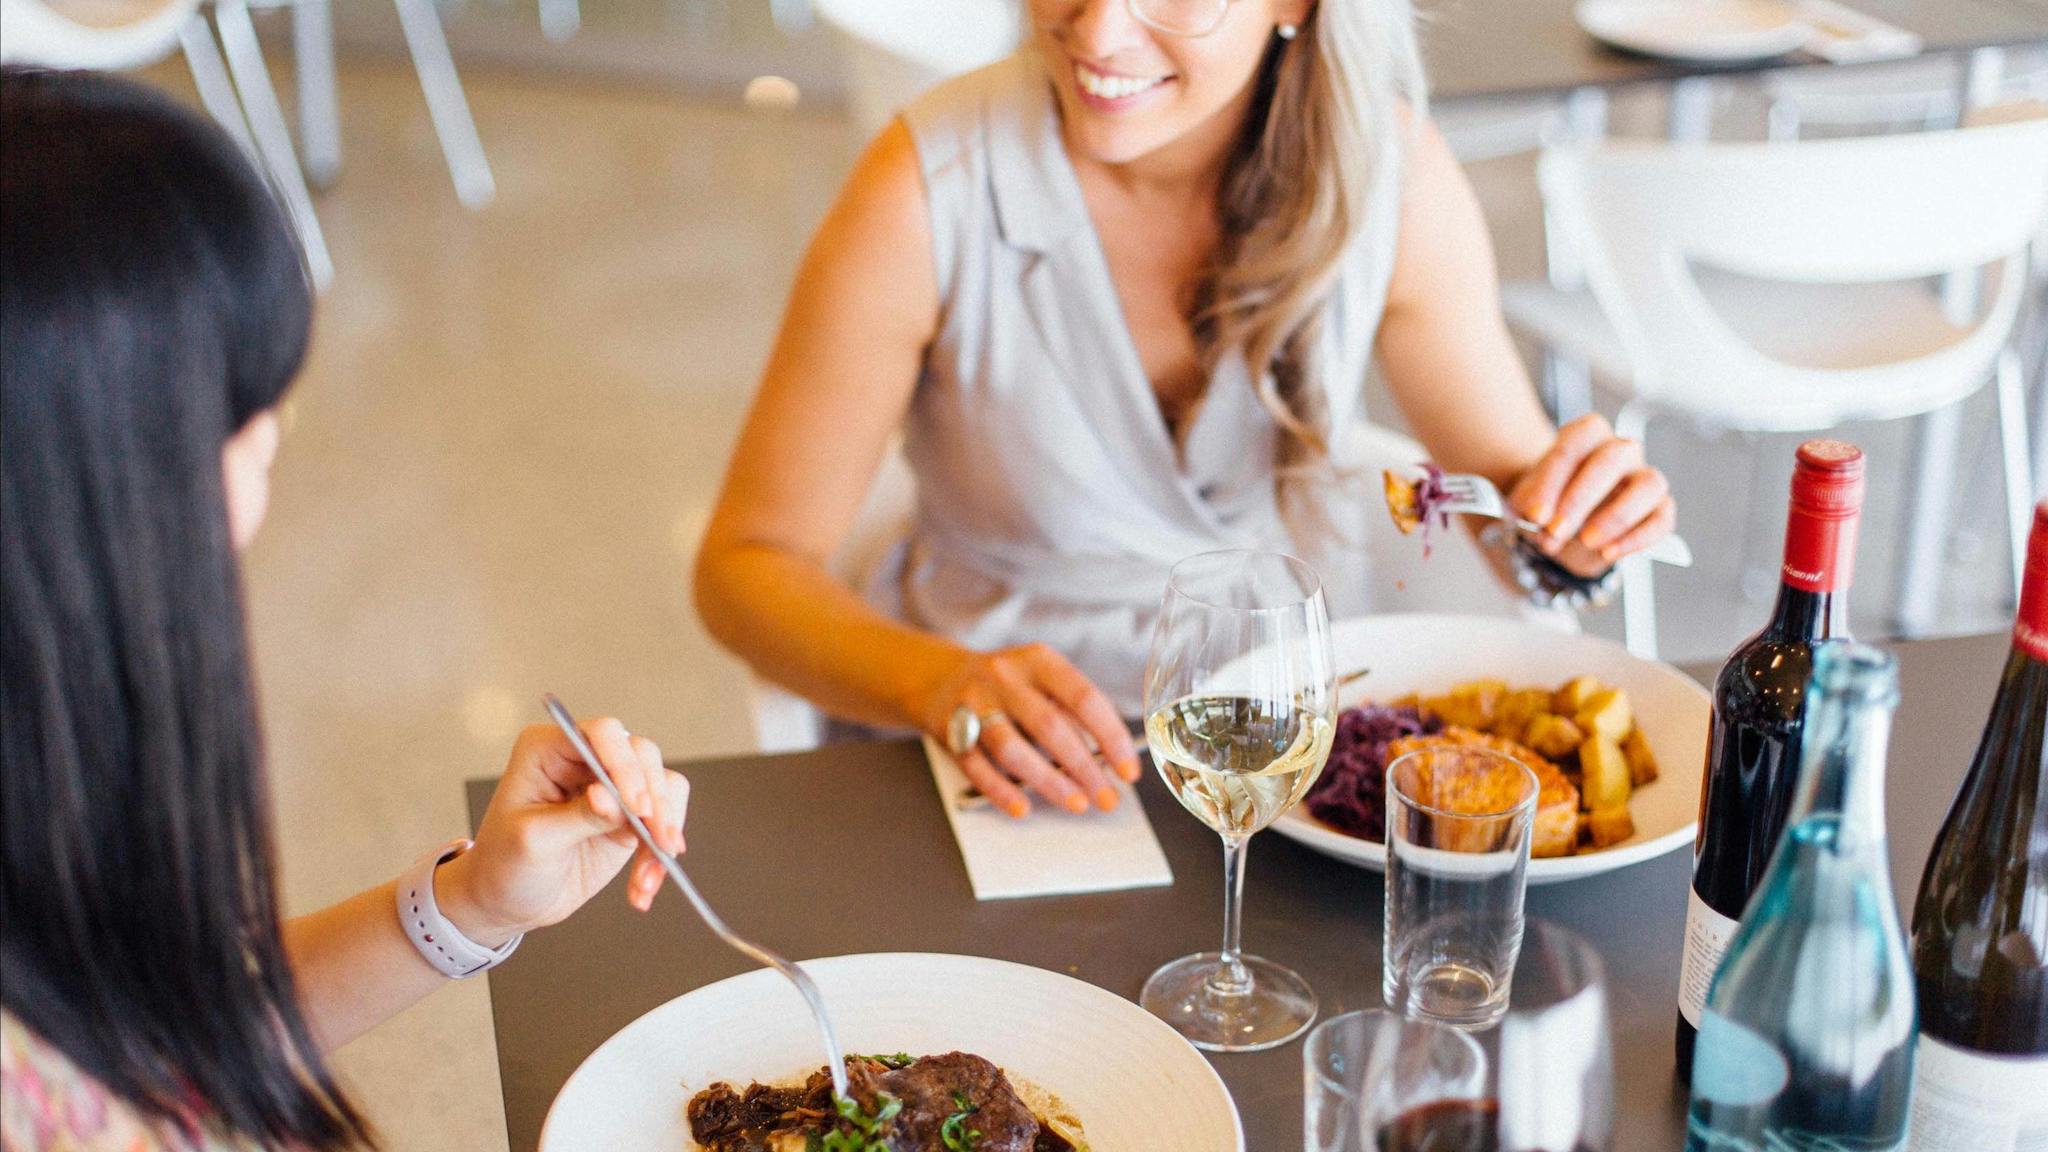 Dine the day away with friends in the Chrismont Restaurant and Larder